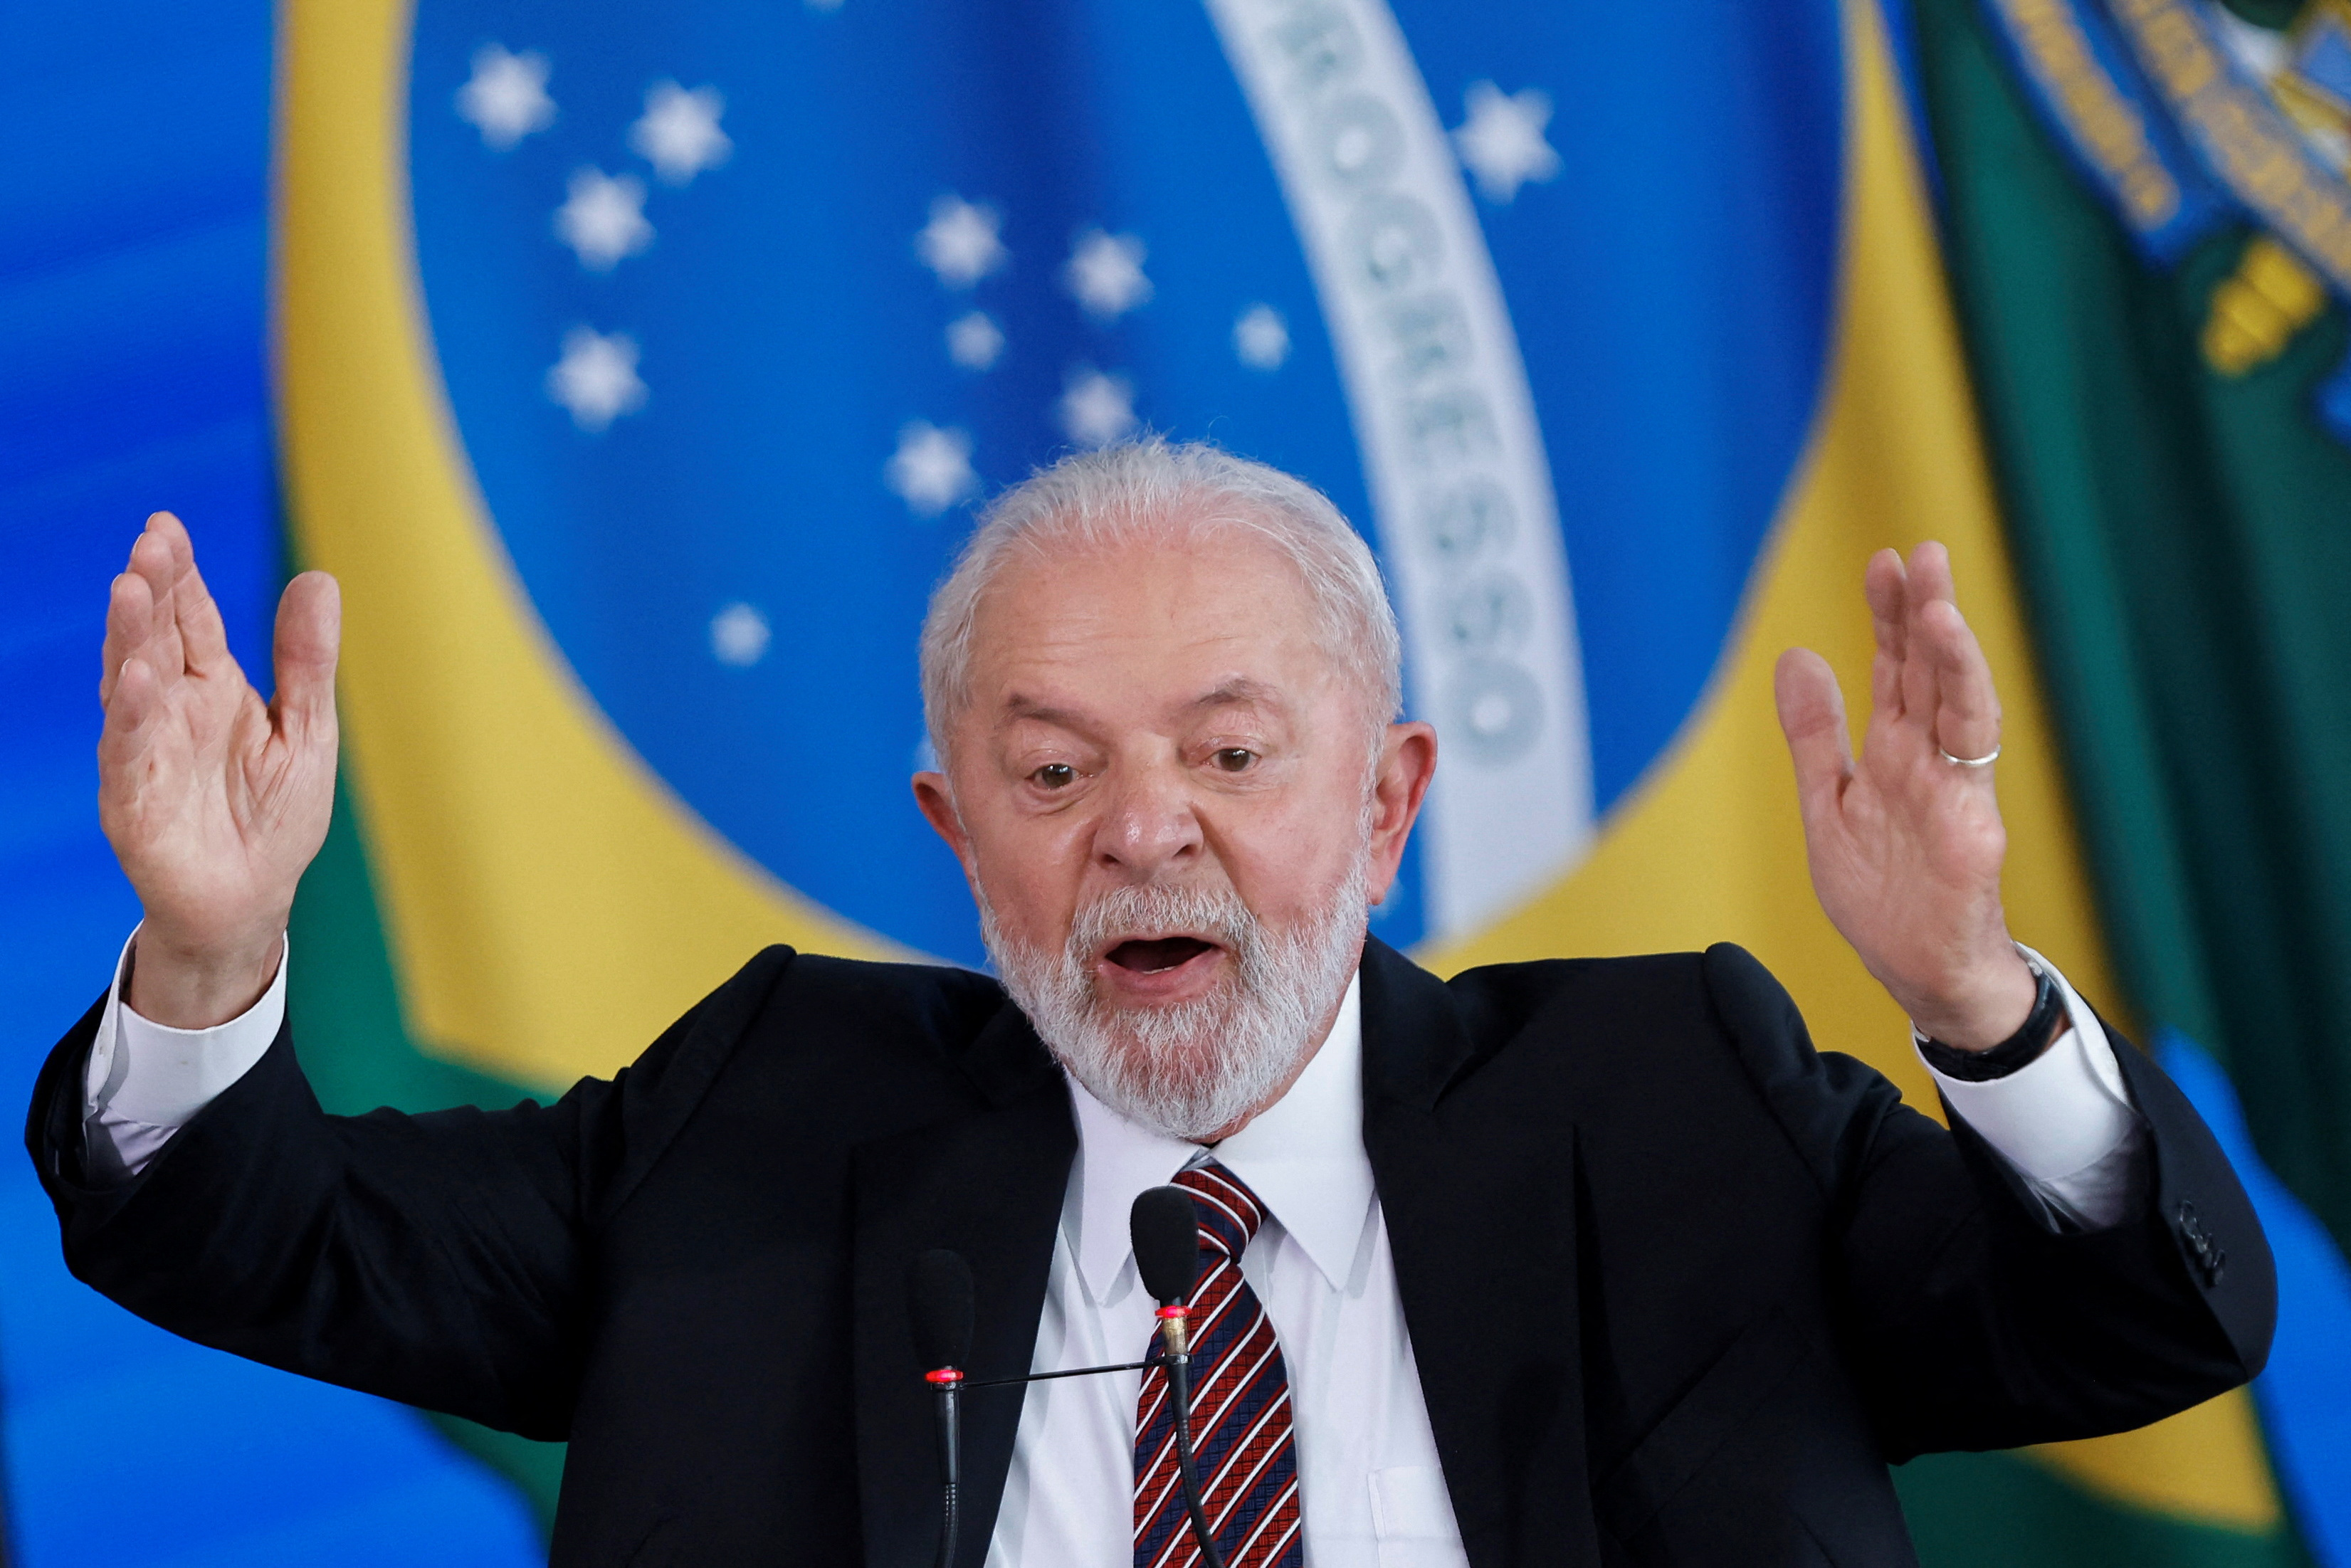 Lula leaves for Colombia next week, where he will meet with President Pietro